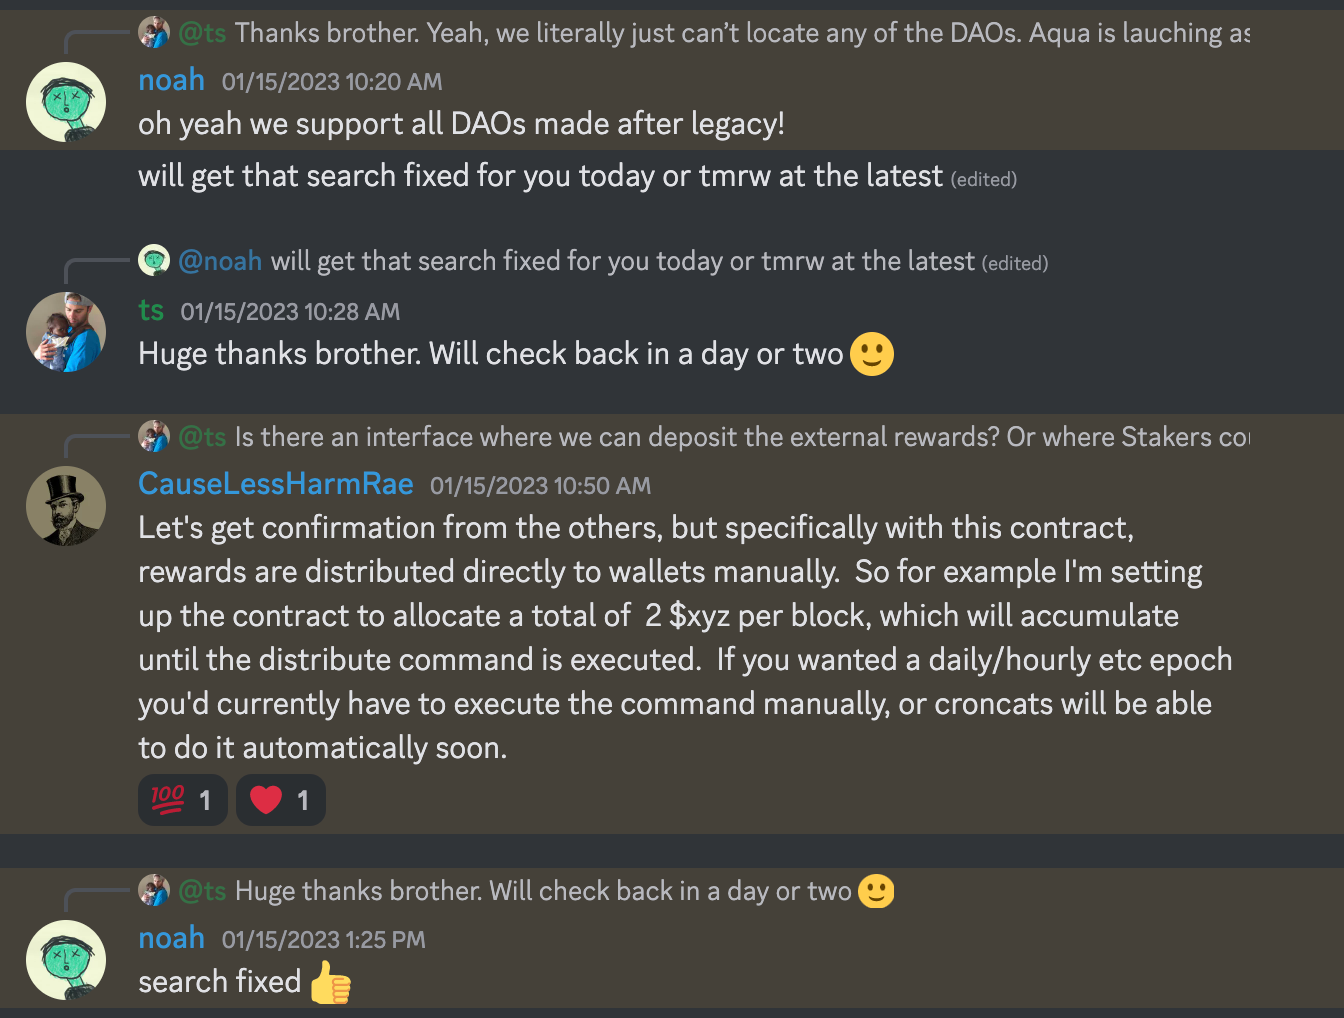 Official Statement on the $Aqua Attack: Part 1 - By  Aqua Team